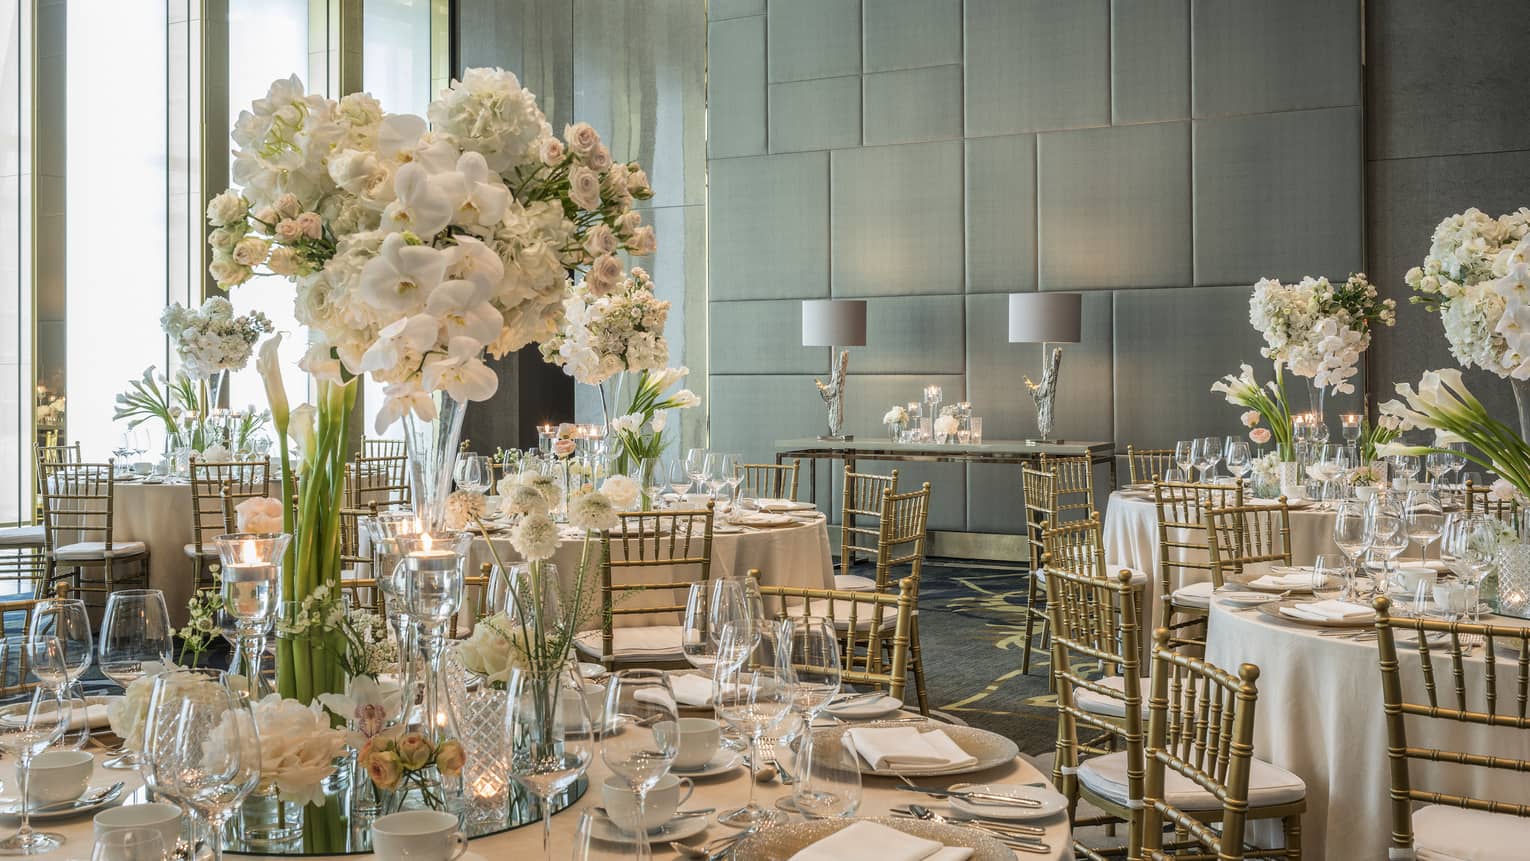 The tables of a wedding reception are set with white tall florals, clear glassware, white plates and silver tableware